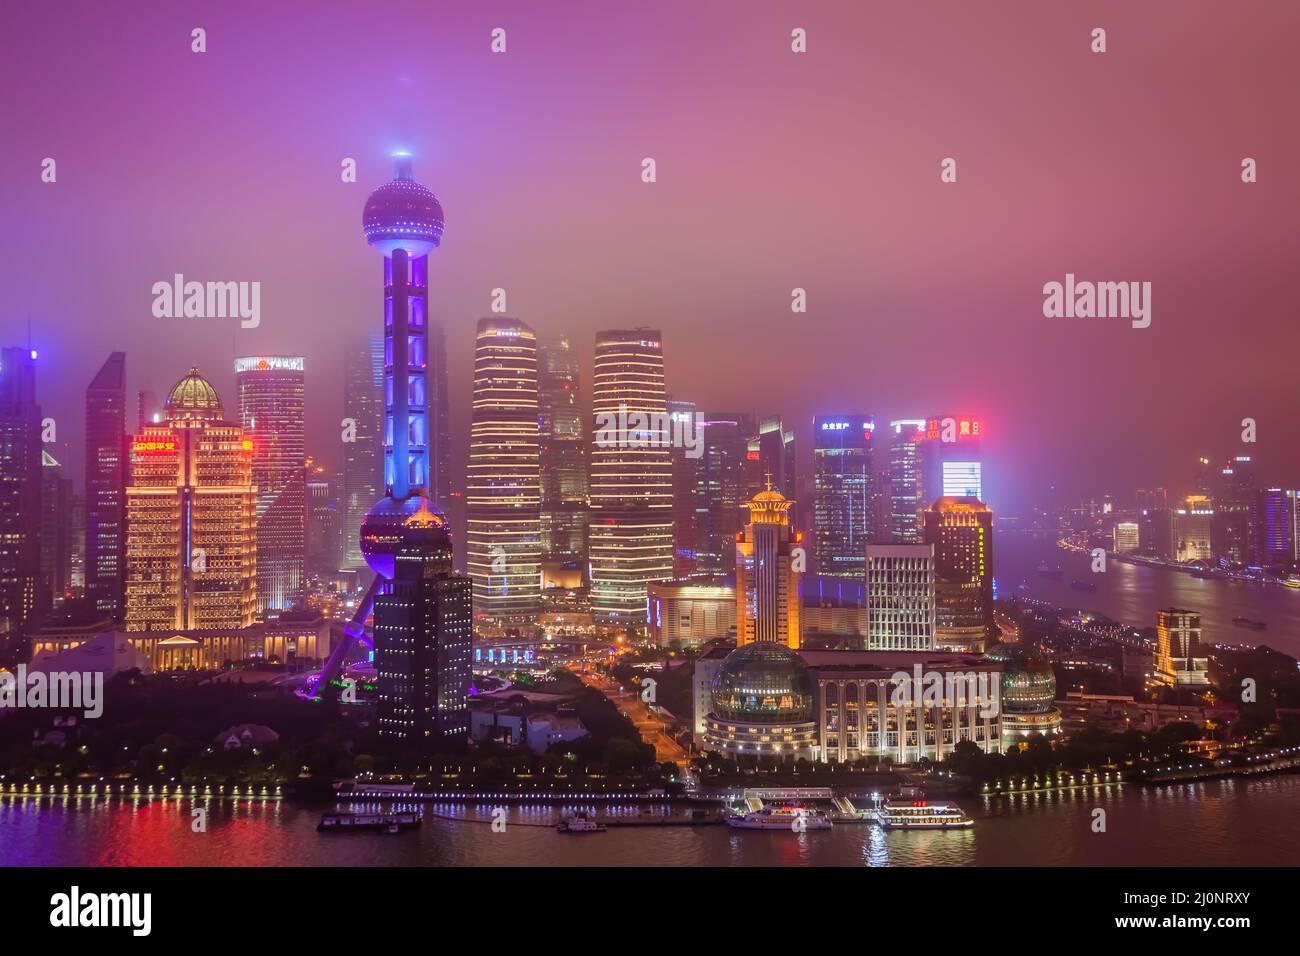 Shanghai, China - May 21, 2018: A night view of the modern Pudong skyline in Shanghai, China Stock Photo